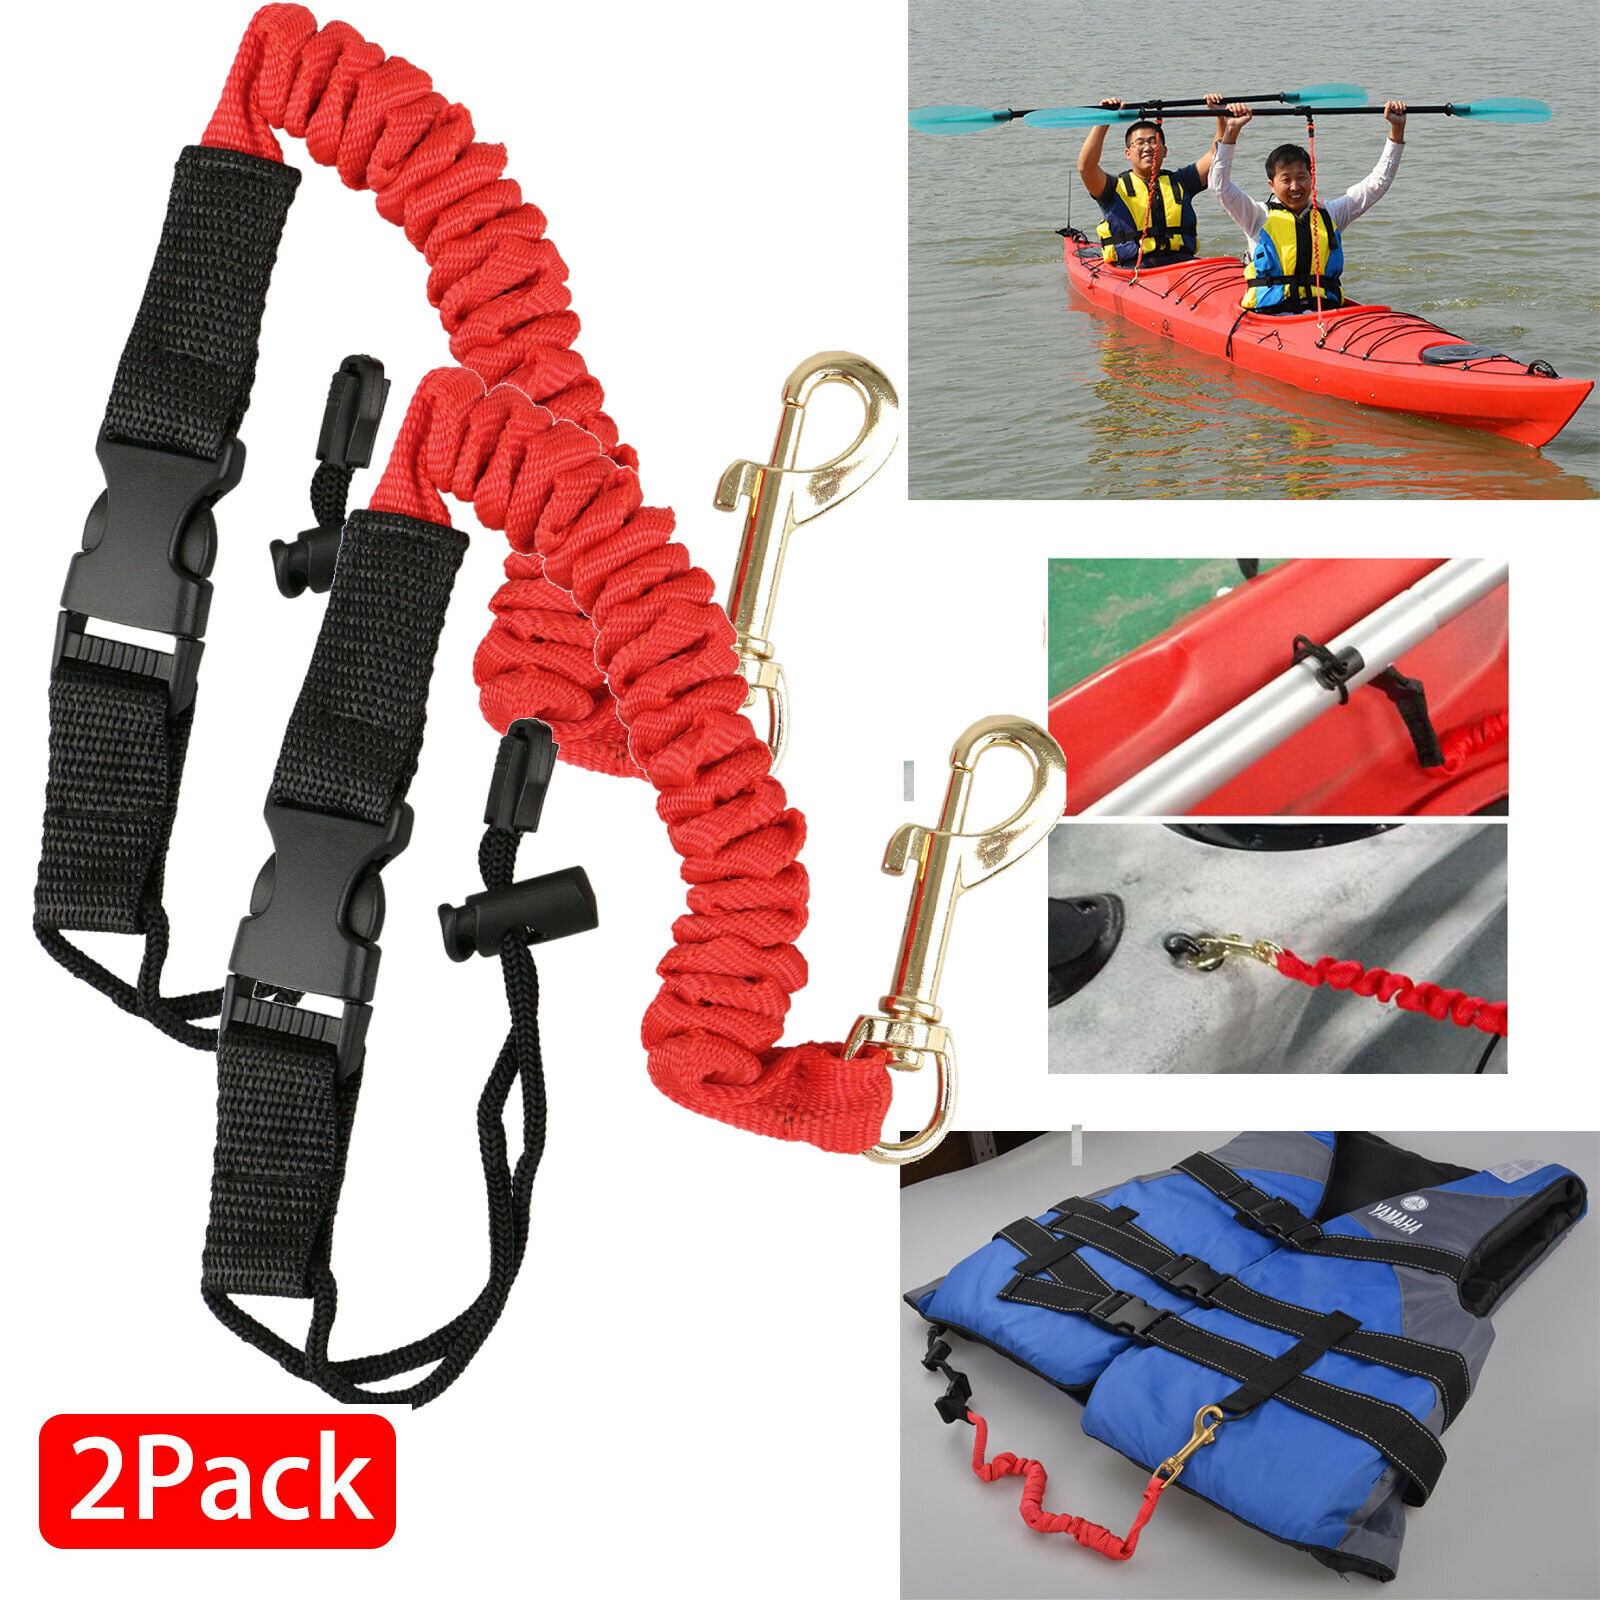 120cm Elastic Leash Lanyard Safety Rope With Carabiner For Paddle 